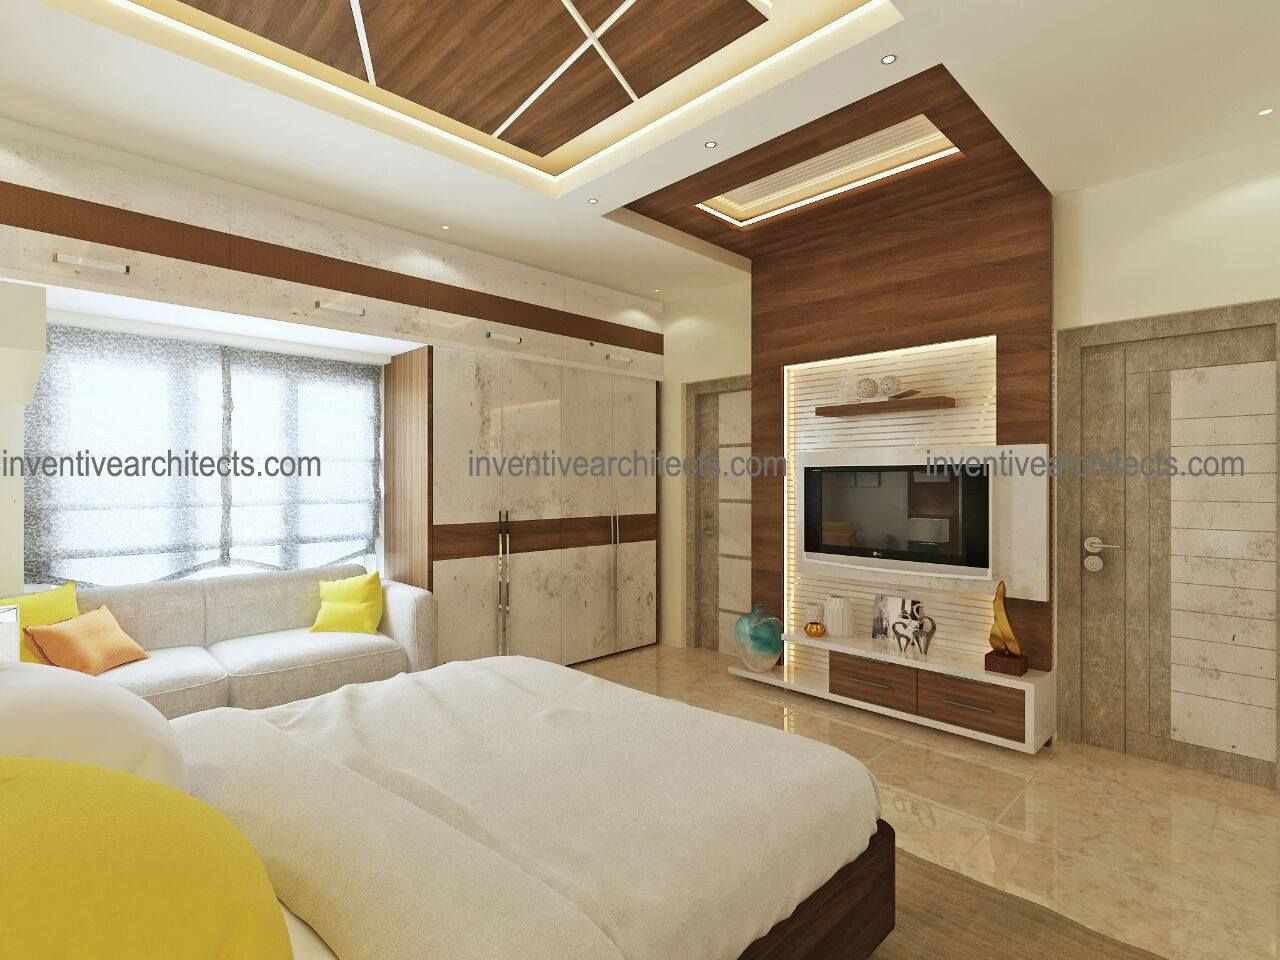 A Modern and Sophisticated Interior Project, Inventivearchitects Inventivearchitects Modern style bedroom